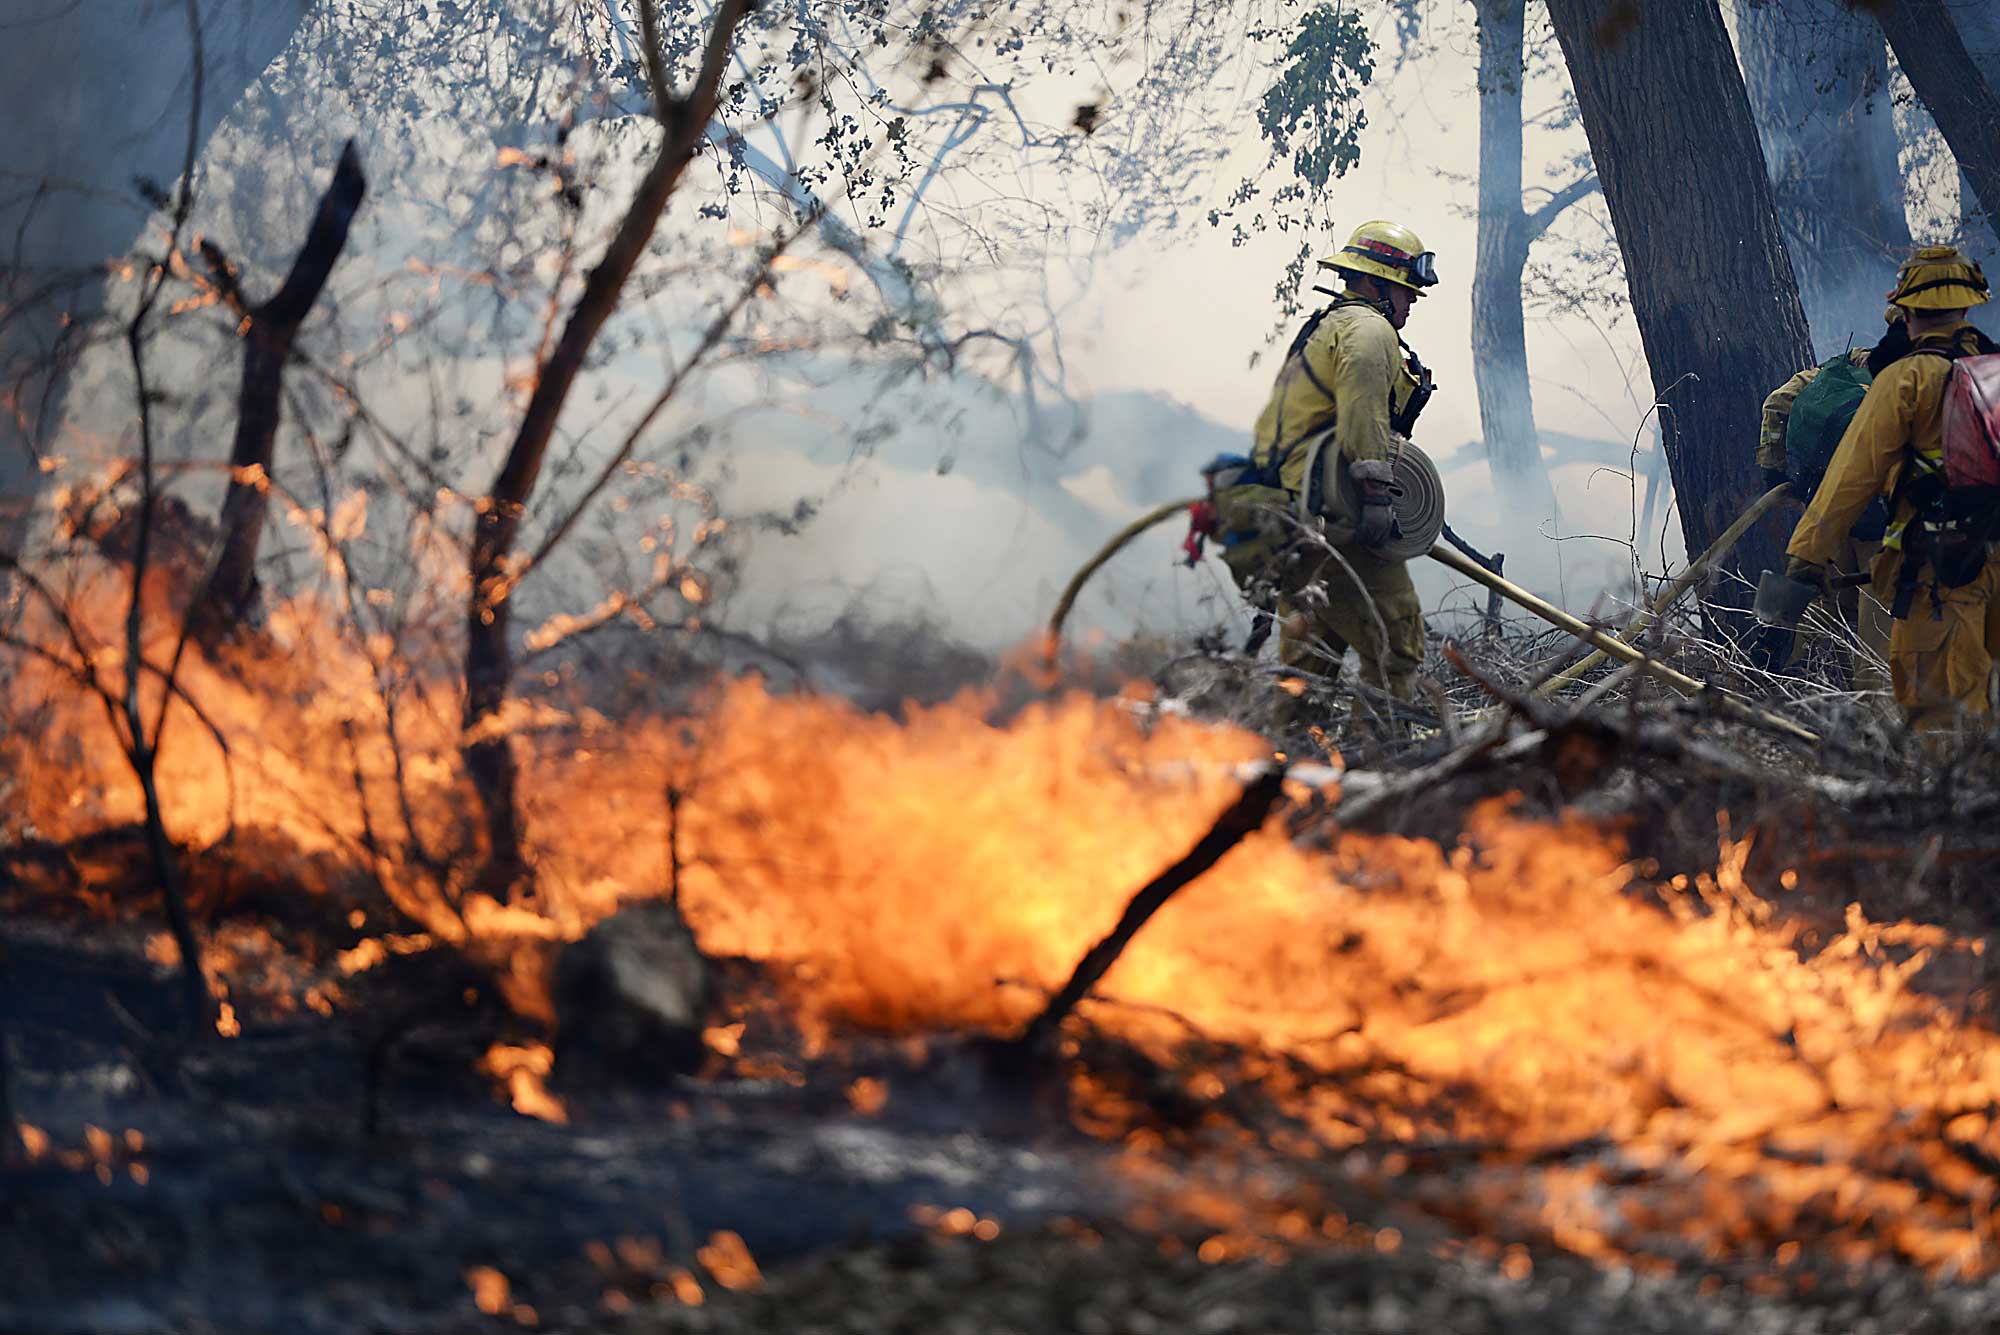 Firefighters battle a wildfire in The Mojave Narrows Regional Park in Victorville Calif., March 31, 2015.